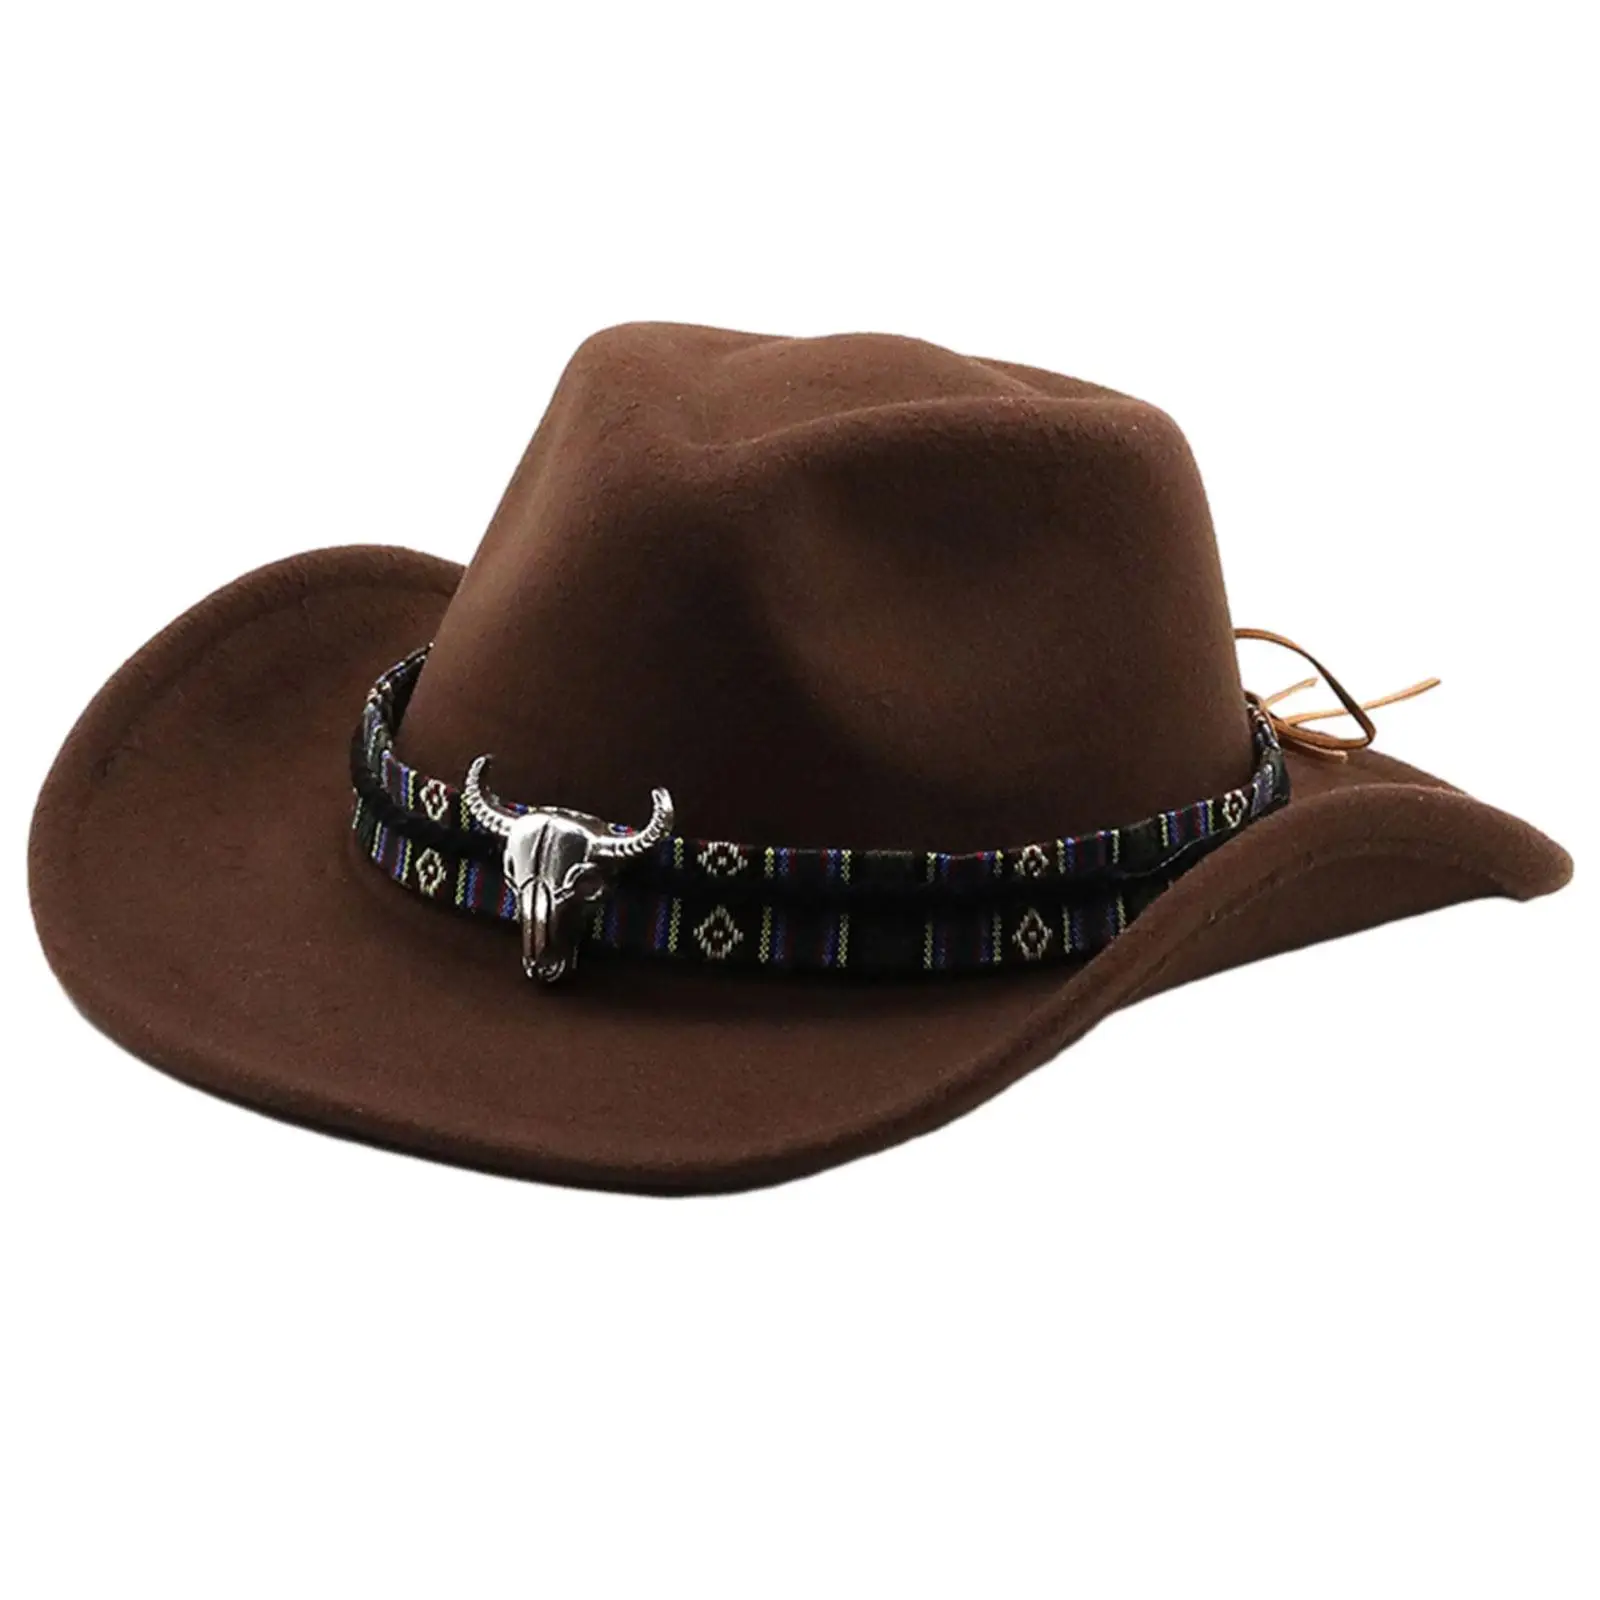 Cowboy Hat Comfortable Summer Outdoor Sunshade Hat for Fishing Travel Hiking